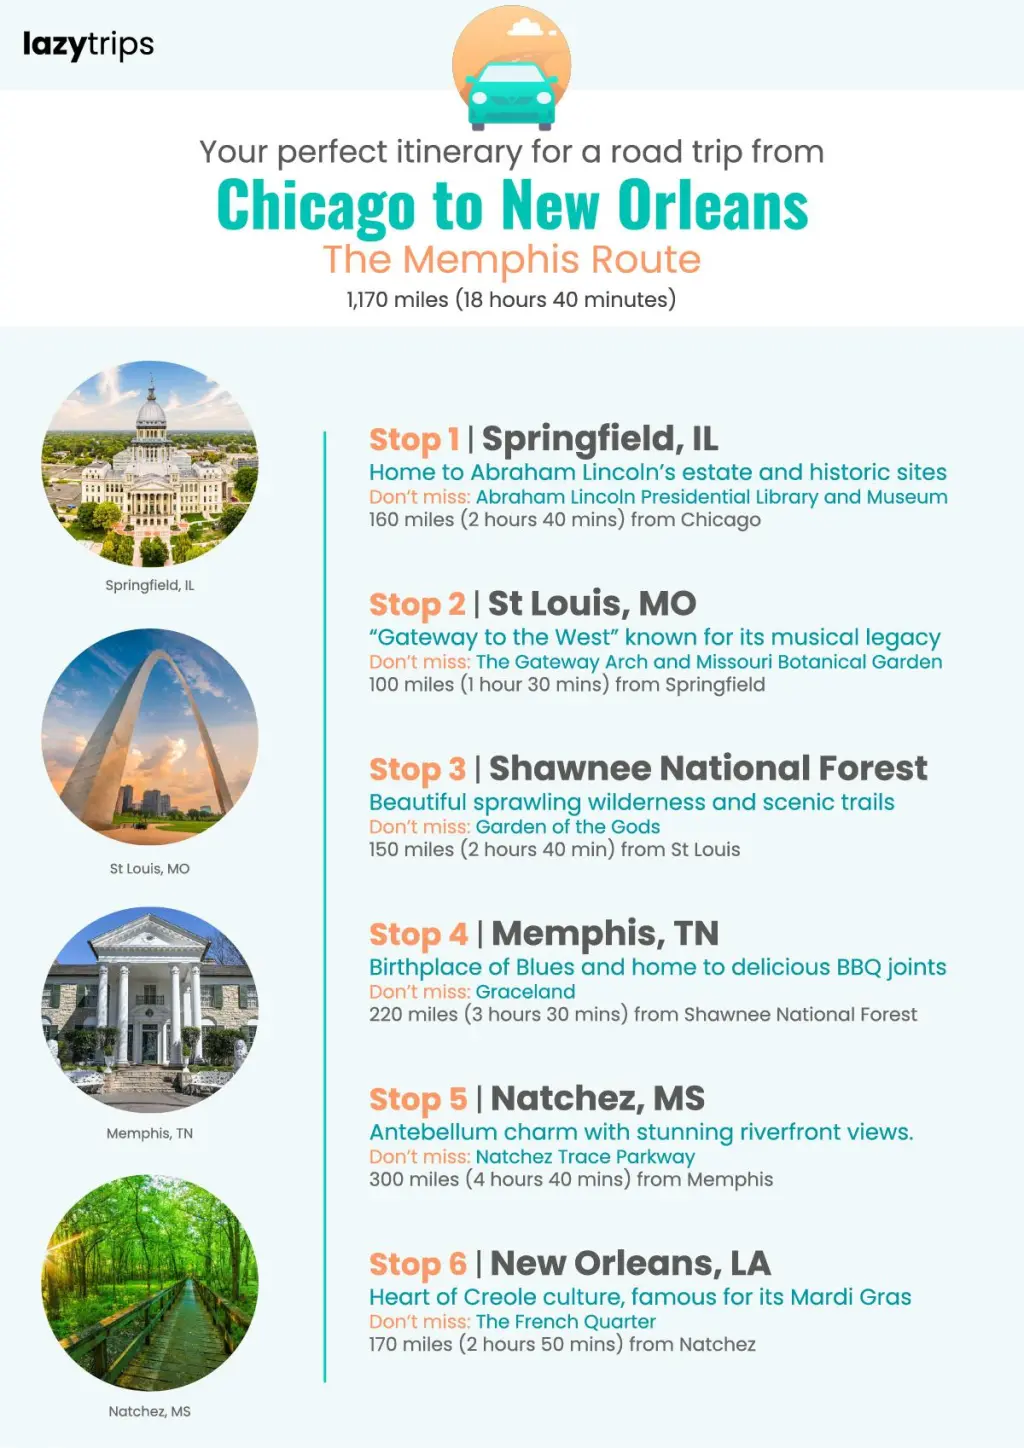 An itinerary for a road trip from Chicago to New Orleans, stopping in Springfield, St Louis, Shawnee National Forest, Memphis, Natchez and New Orleans